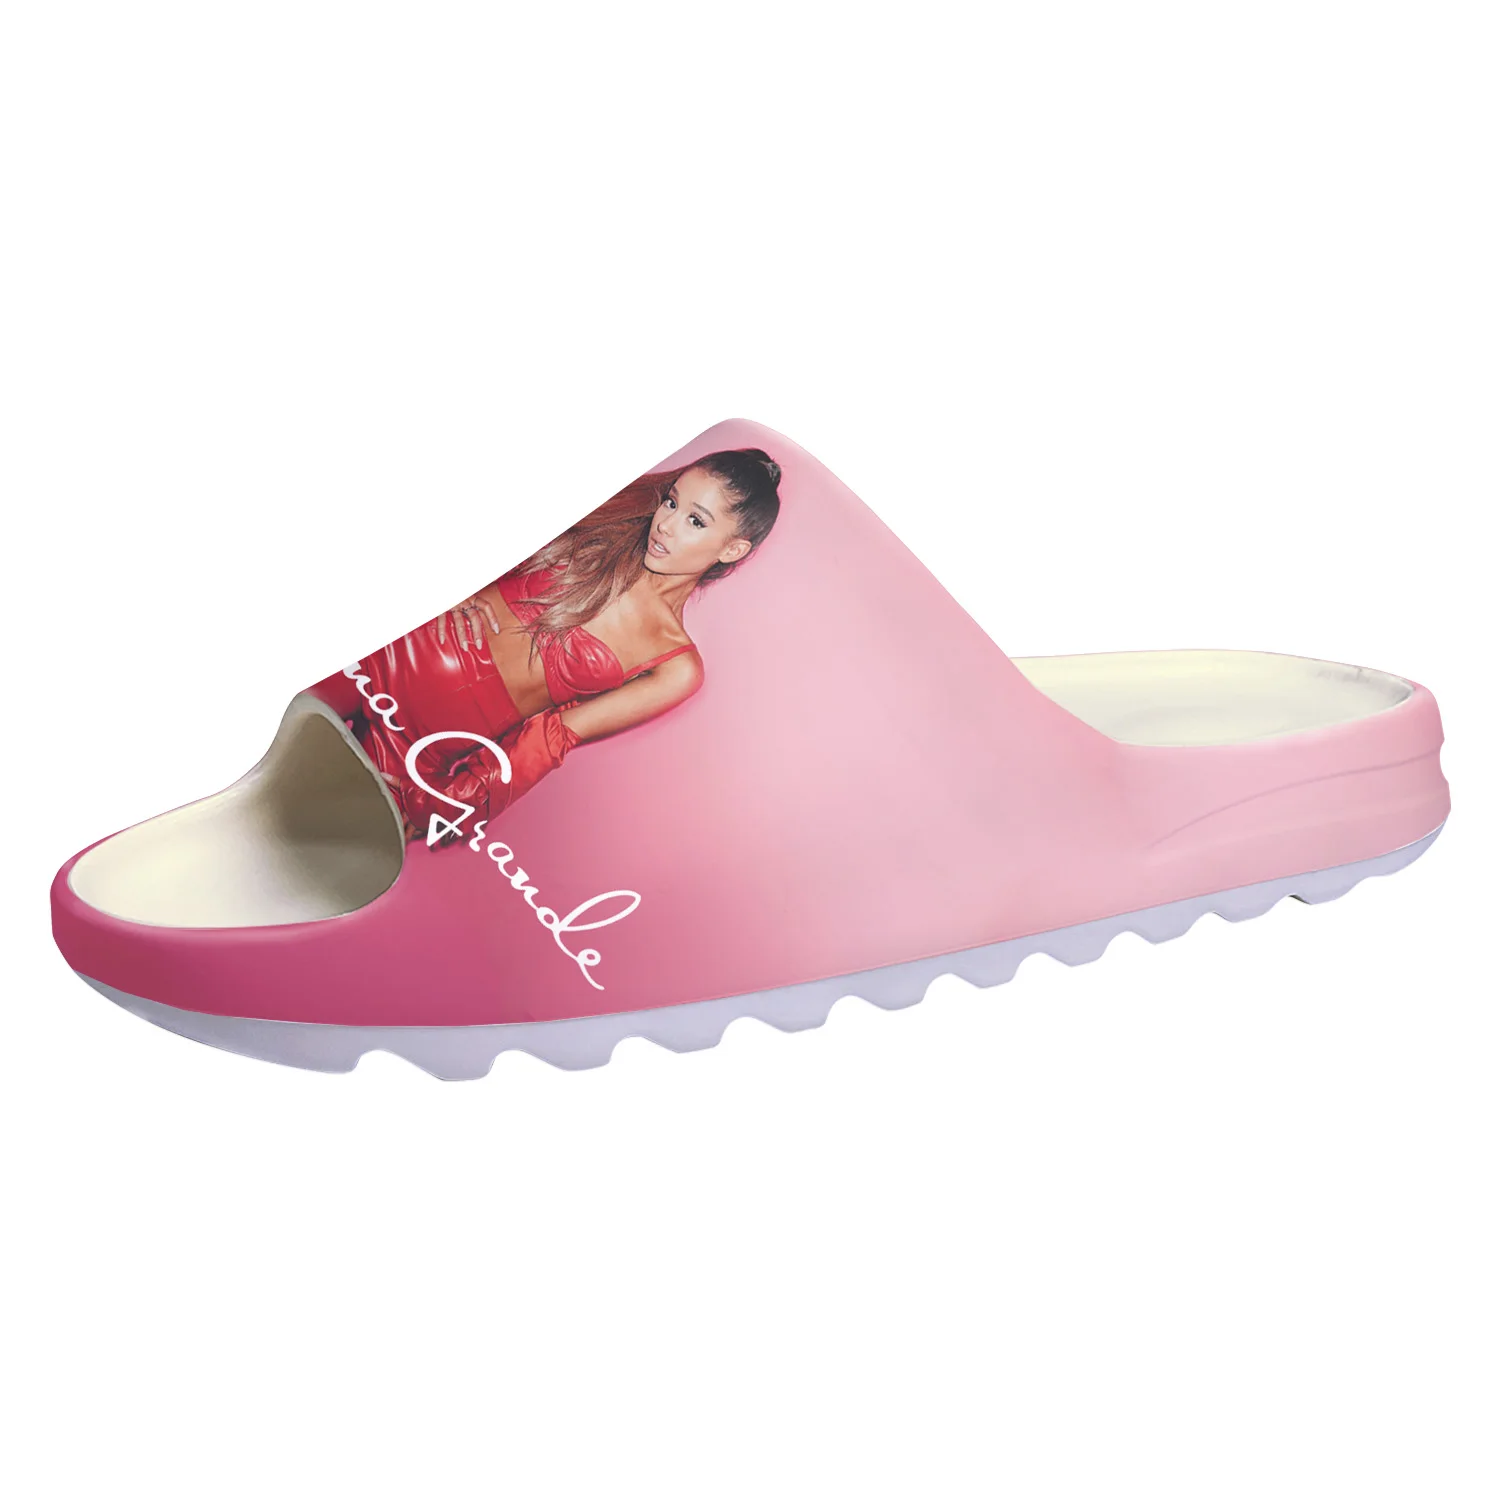 

Ariana Grande Singer Soft Sole Sllipers Home Clogs Water Shoes Mens Womens Teenager Bathroom Beach Customize on Shit Sandals